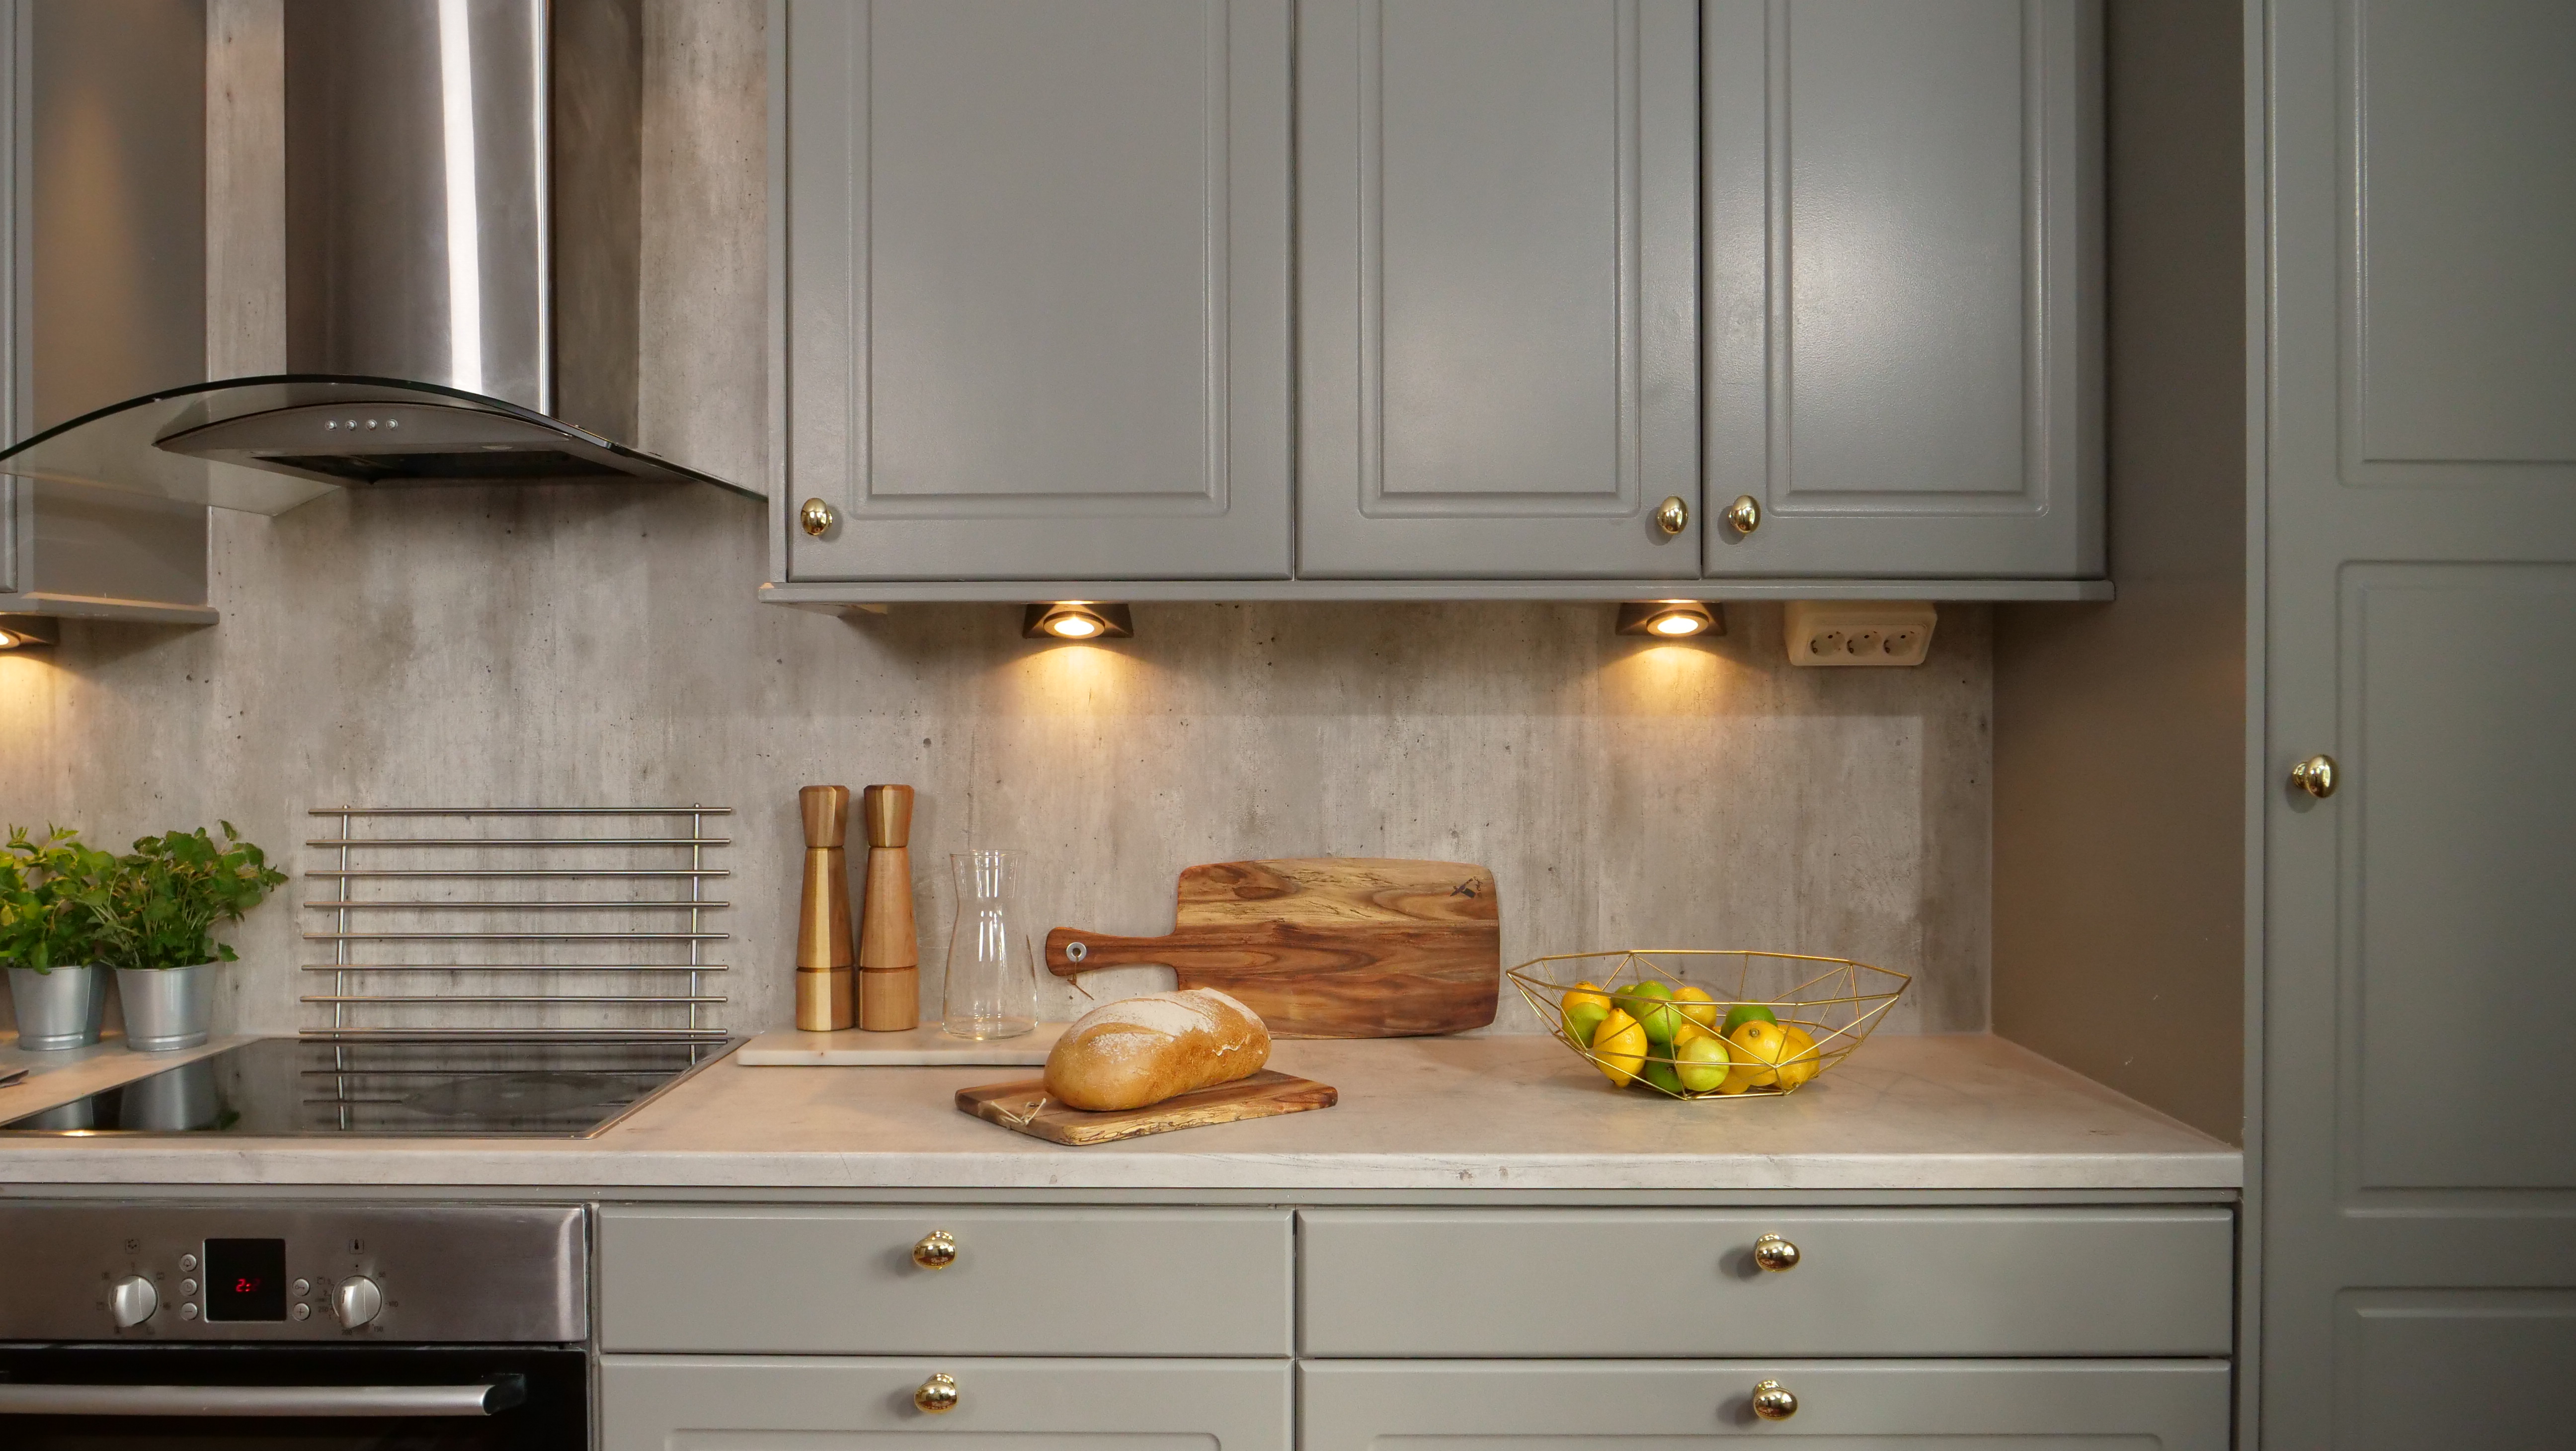 Bring out the best in your kitchen: Fibo Kitchen Boards are a stylish, low-maintenance option for kitchen backsplashes.